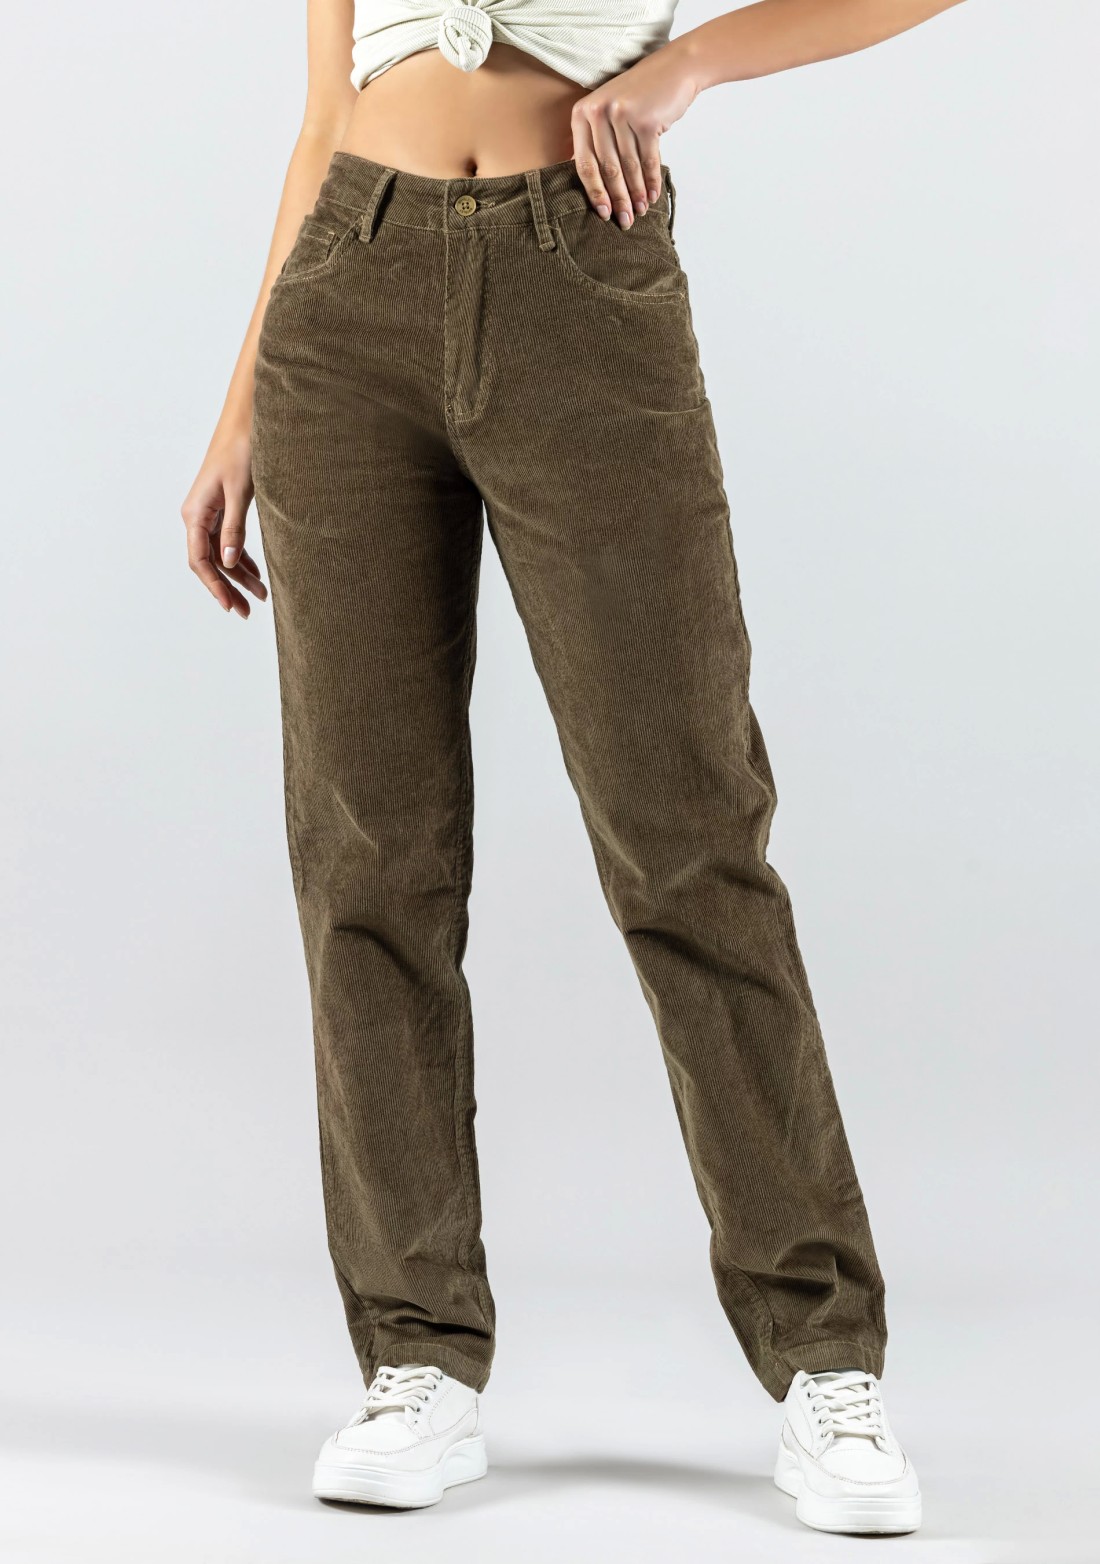 Buy Beige Trousers & Pants for Women by Outryt Online | Ajio.com